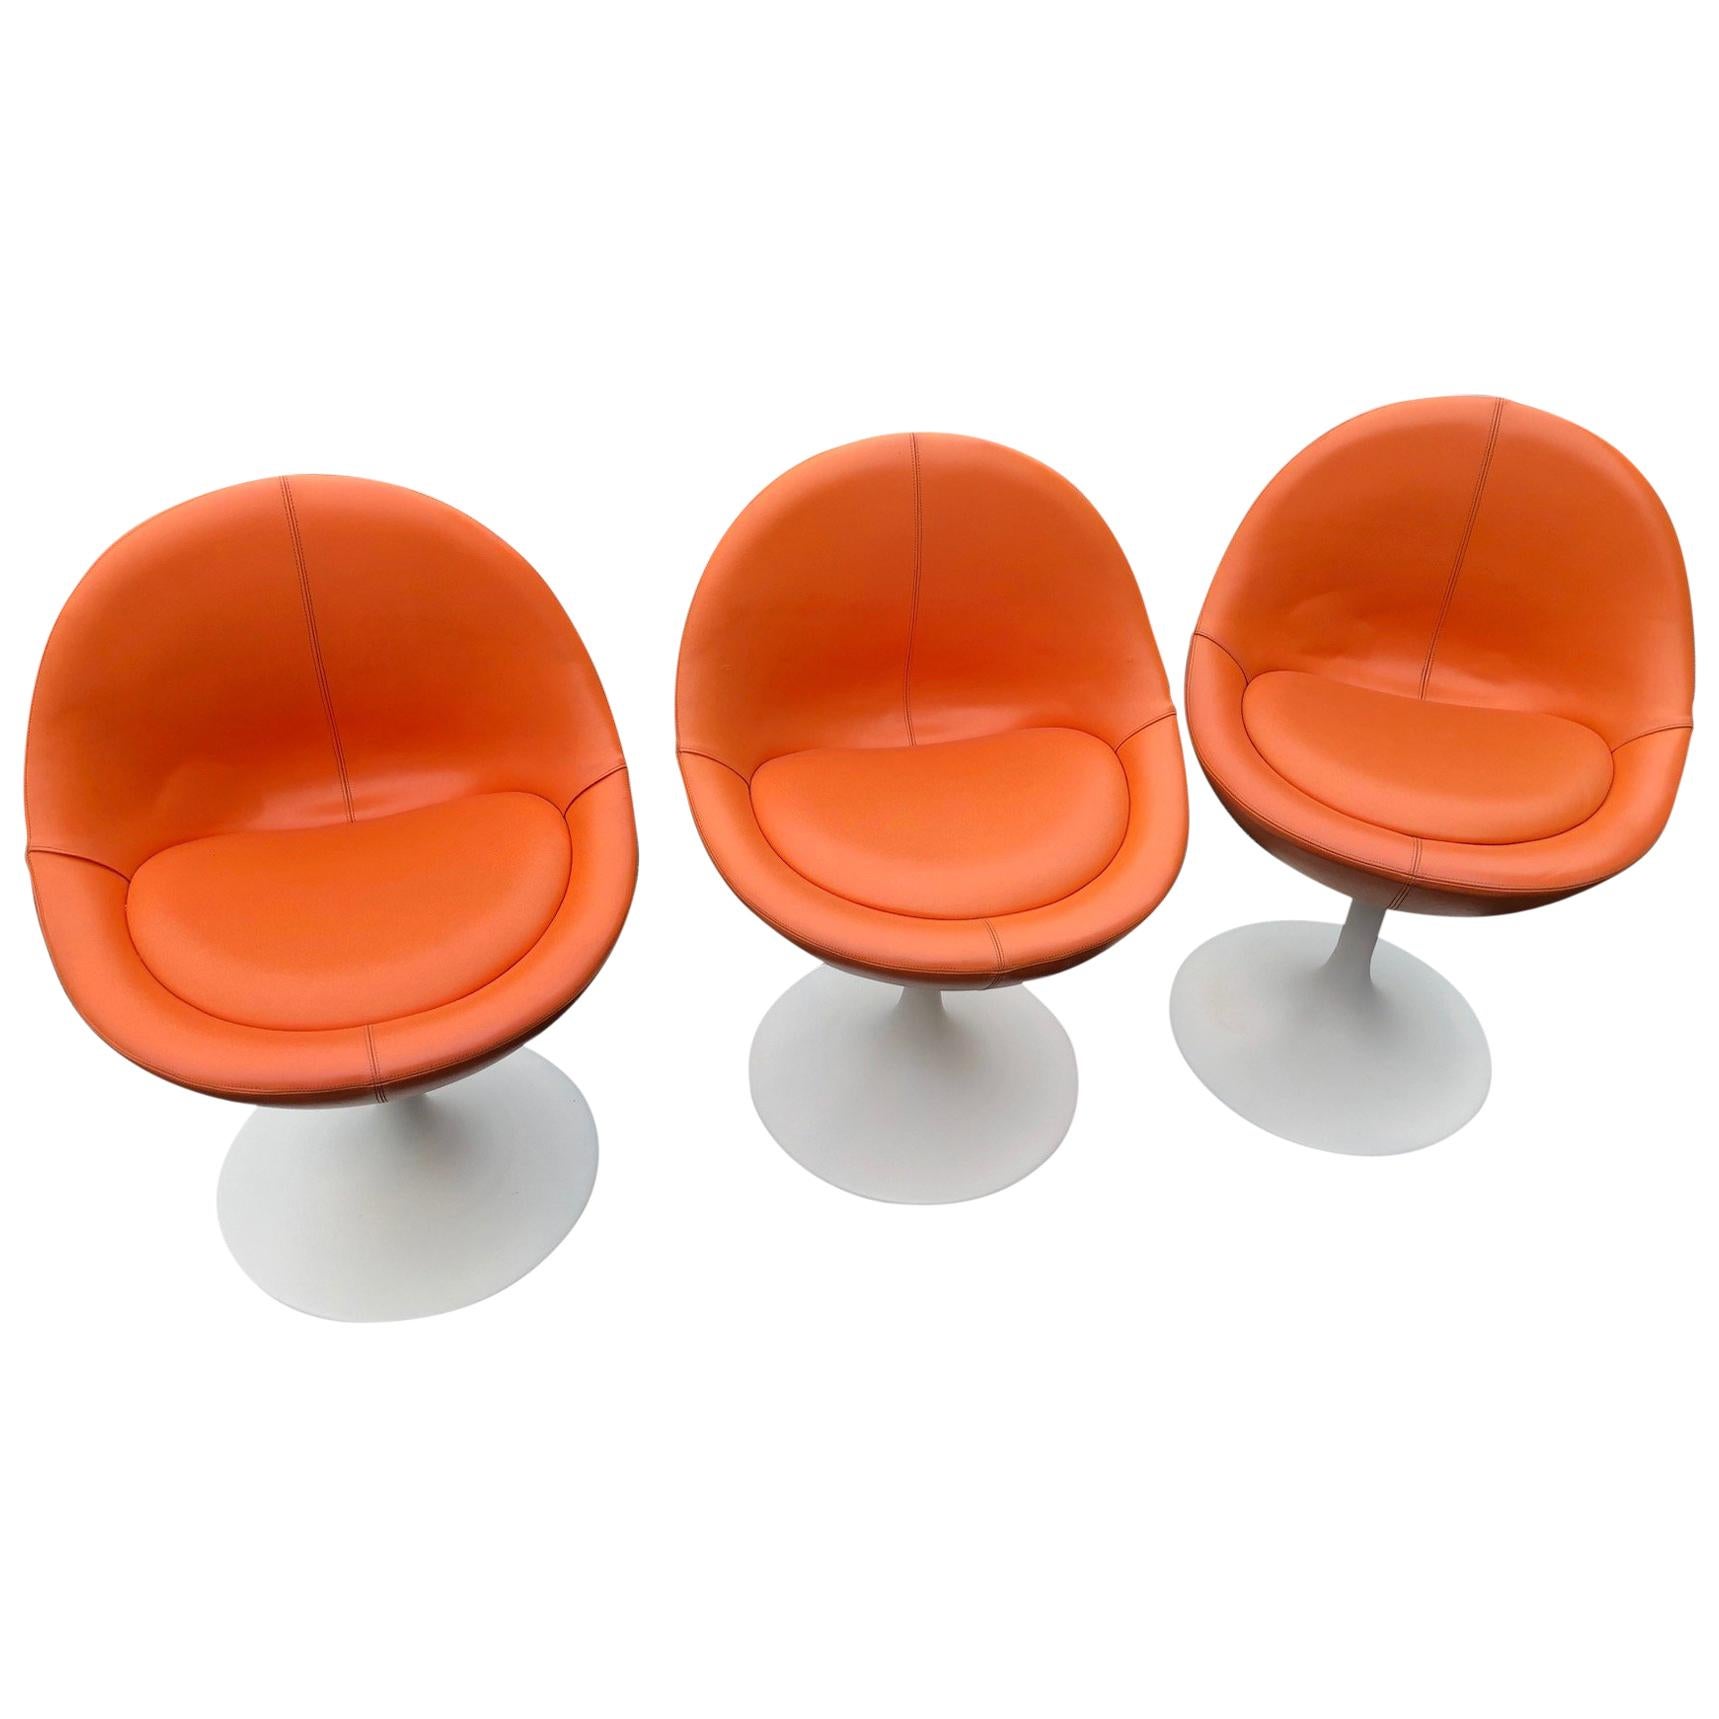 Three Mid-Century Modern Tulip Chairs For Sale